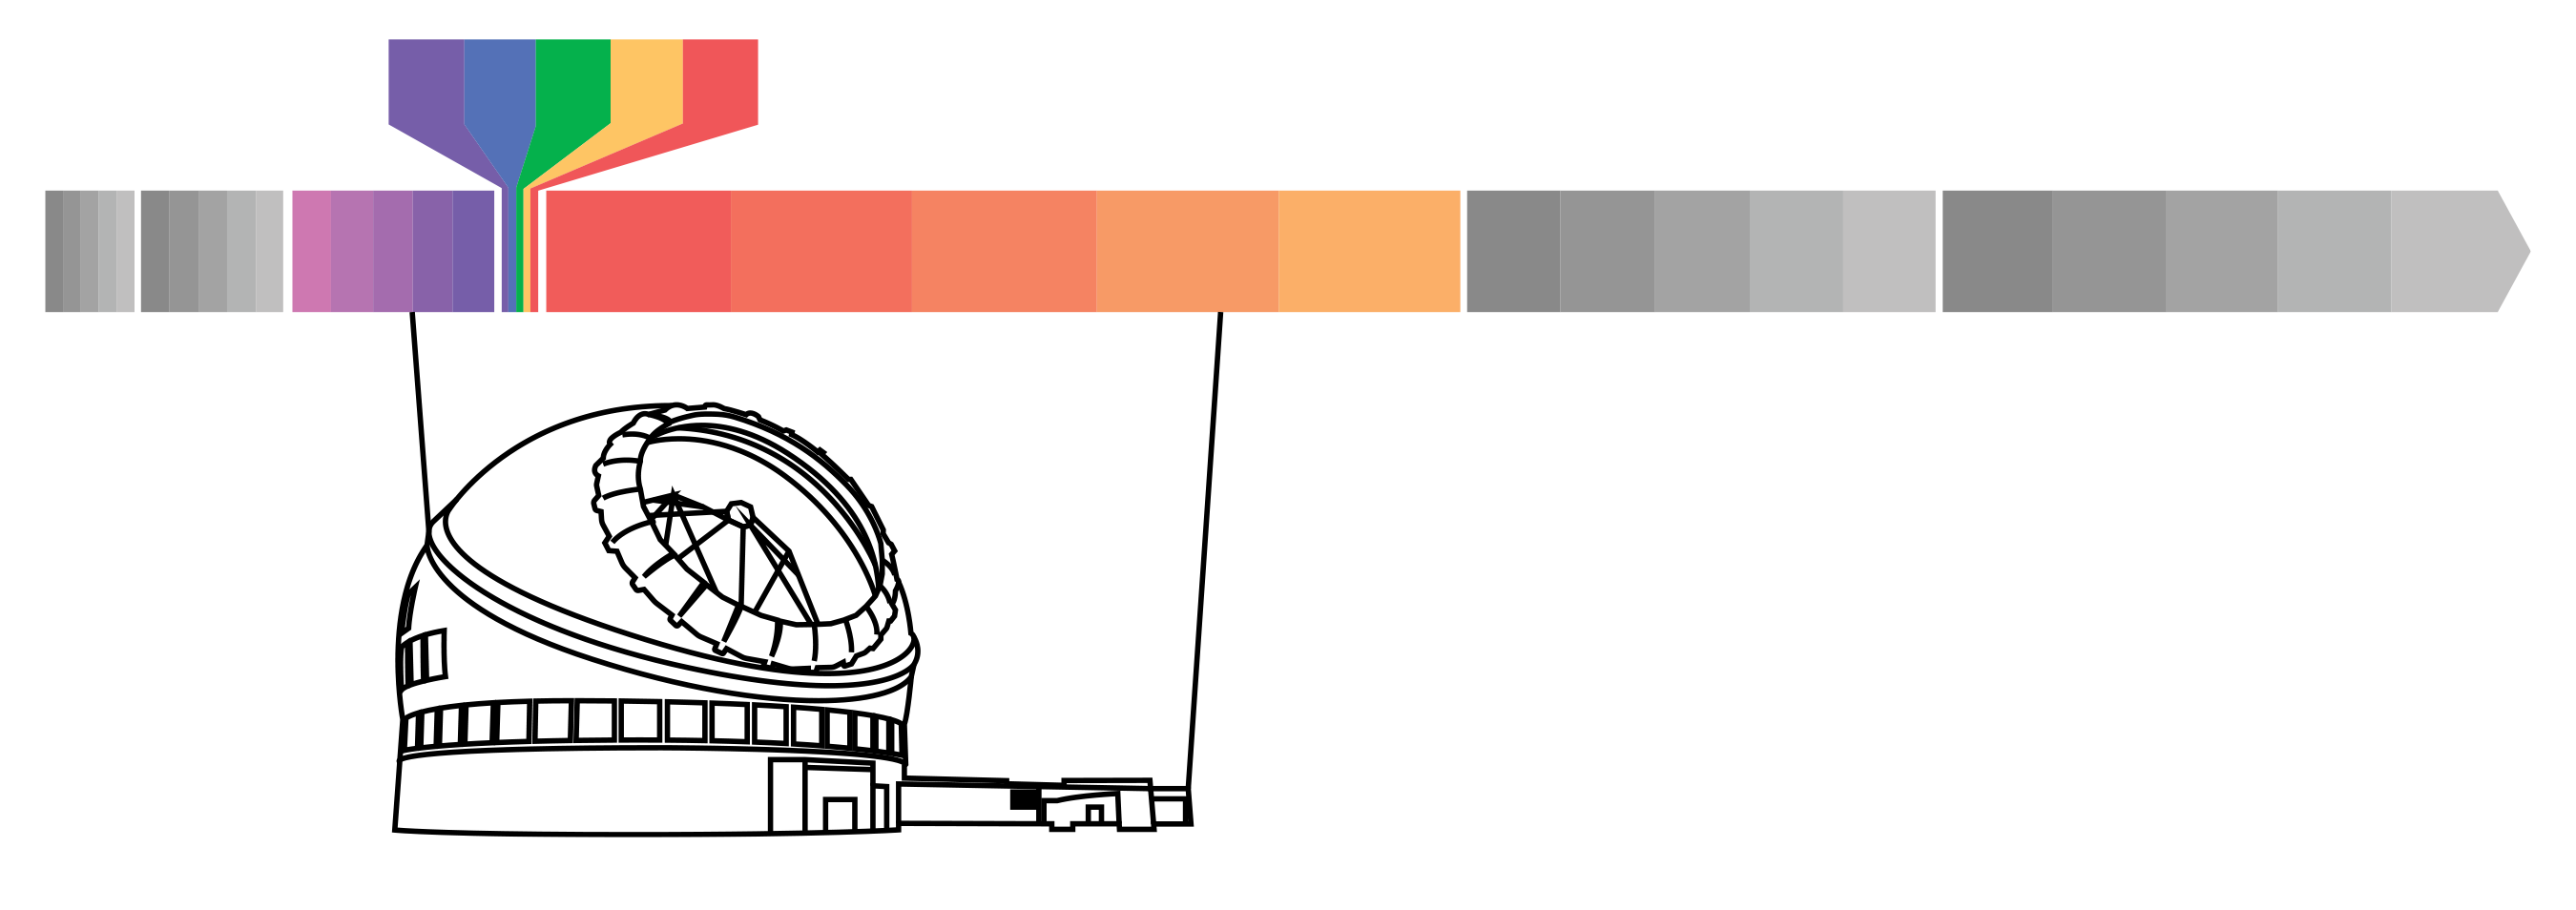 Wavelength range from near-ultraviolet to mid-infrared